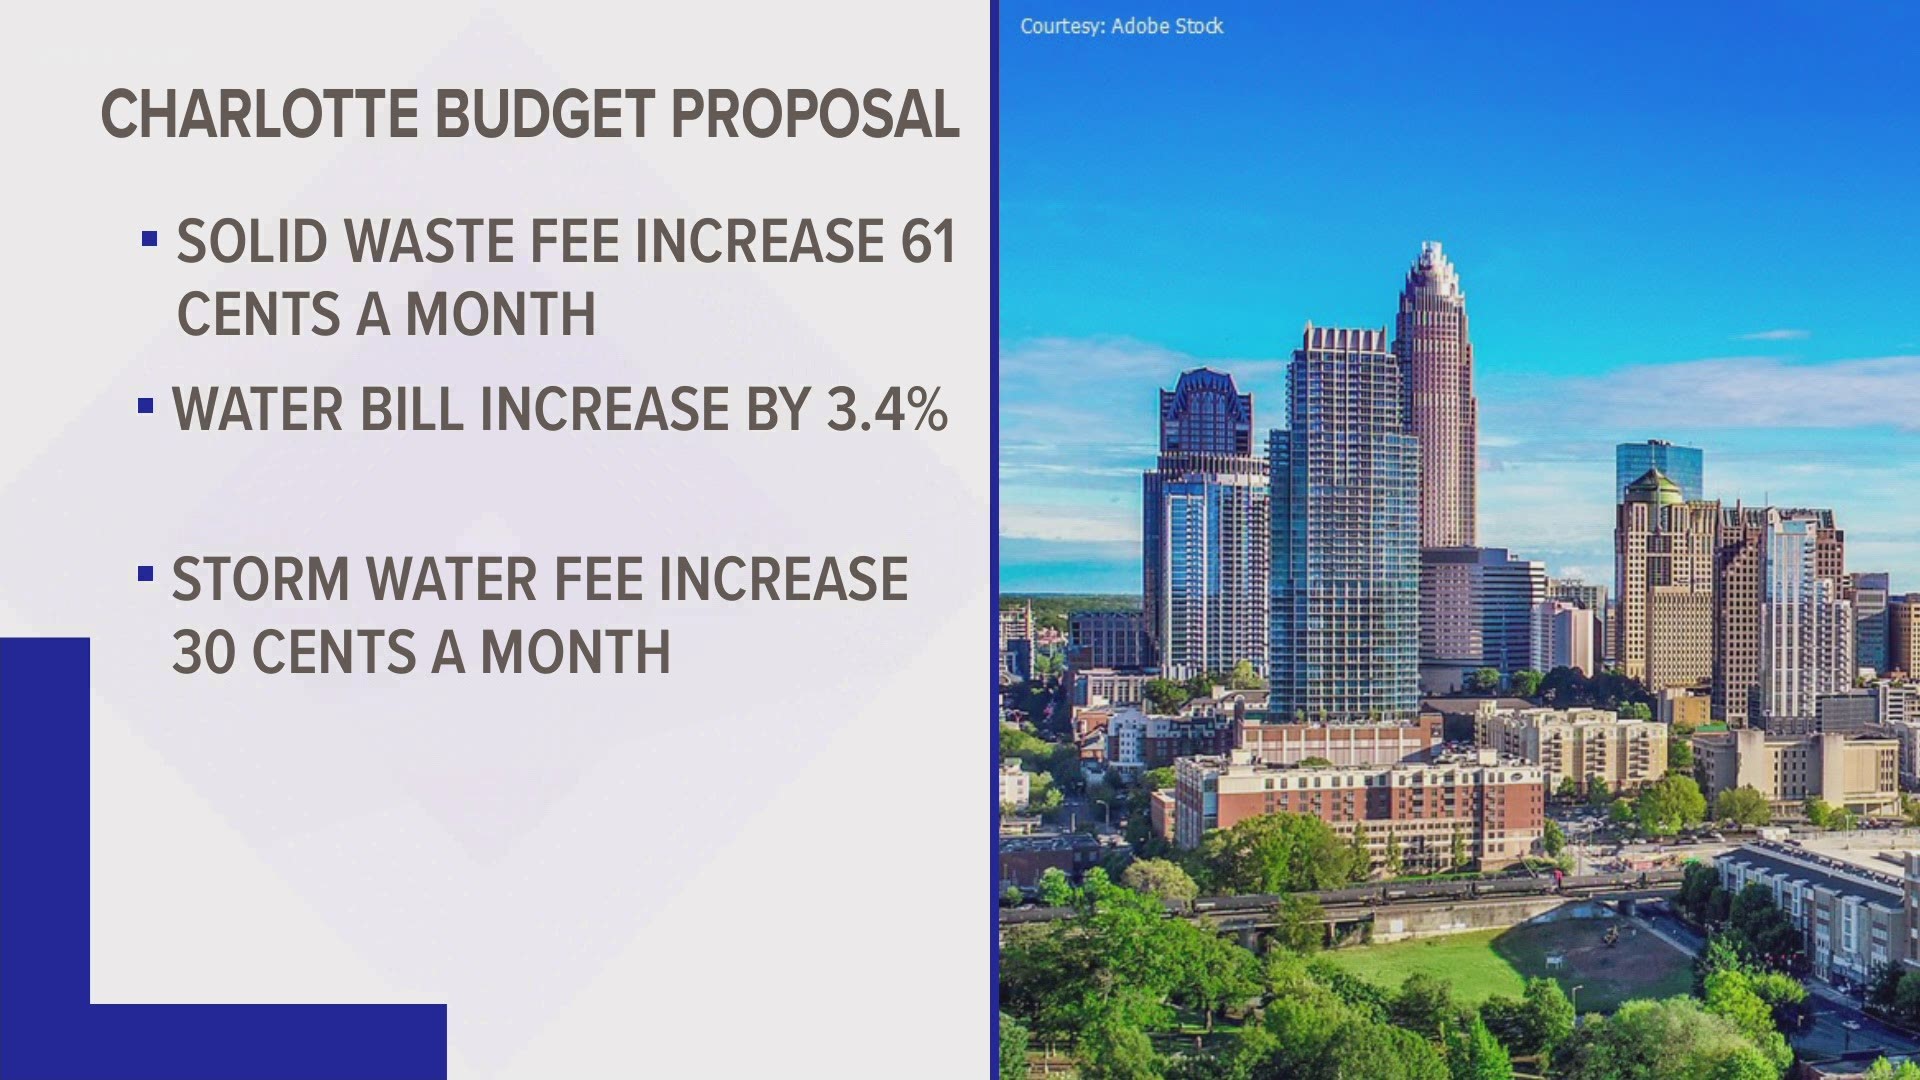 Today, Charlotte City Council got their first look at the fiscal year 2022 budget.